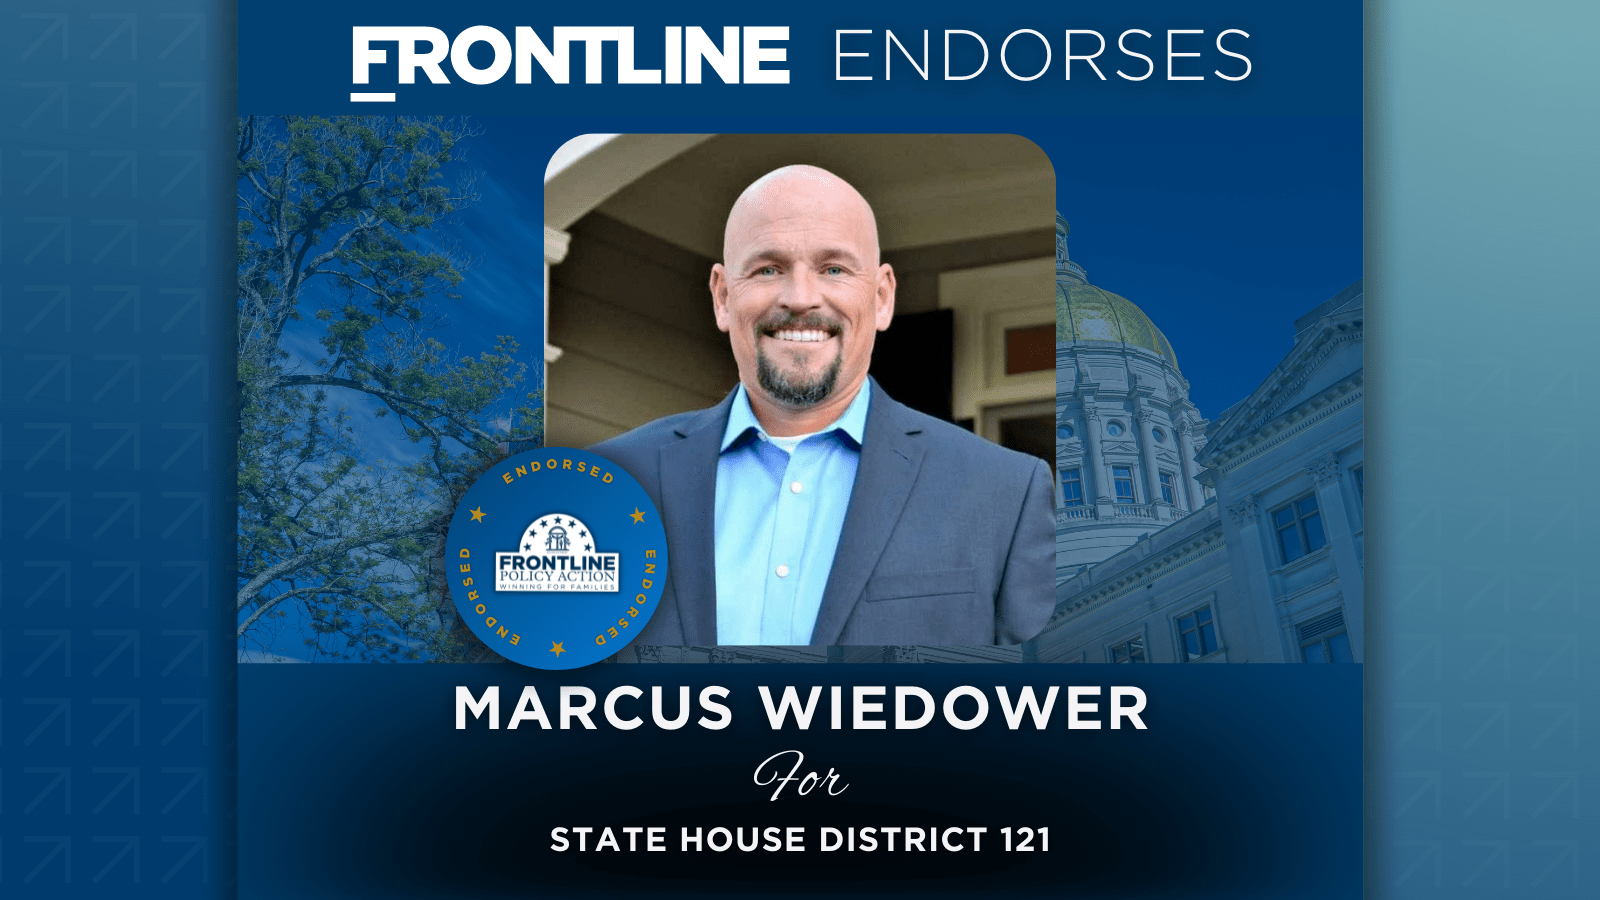 BREAKING: Frontline Endorses Marcus Wiedower for State House District 121